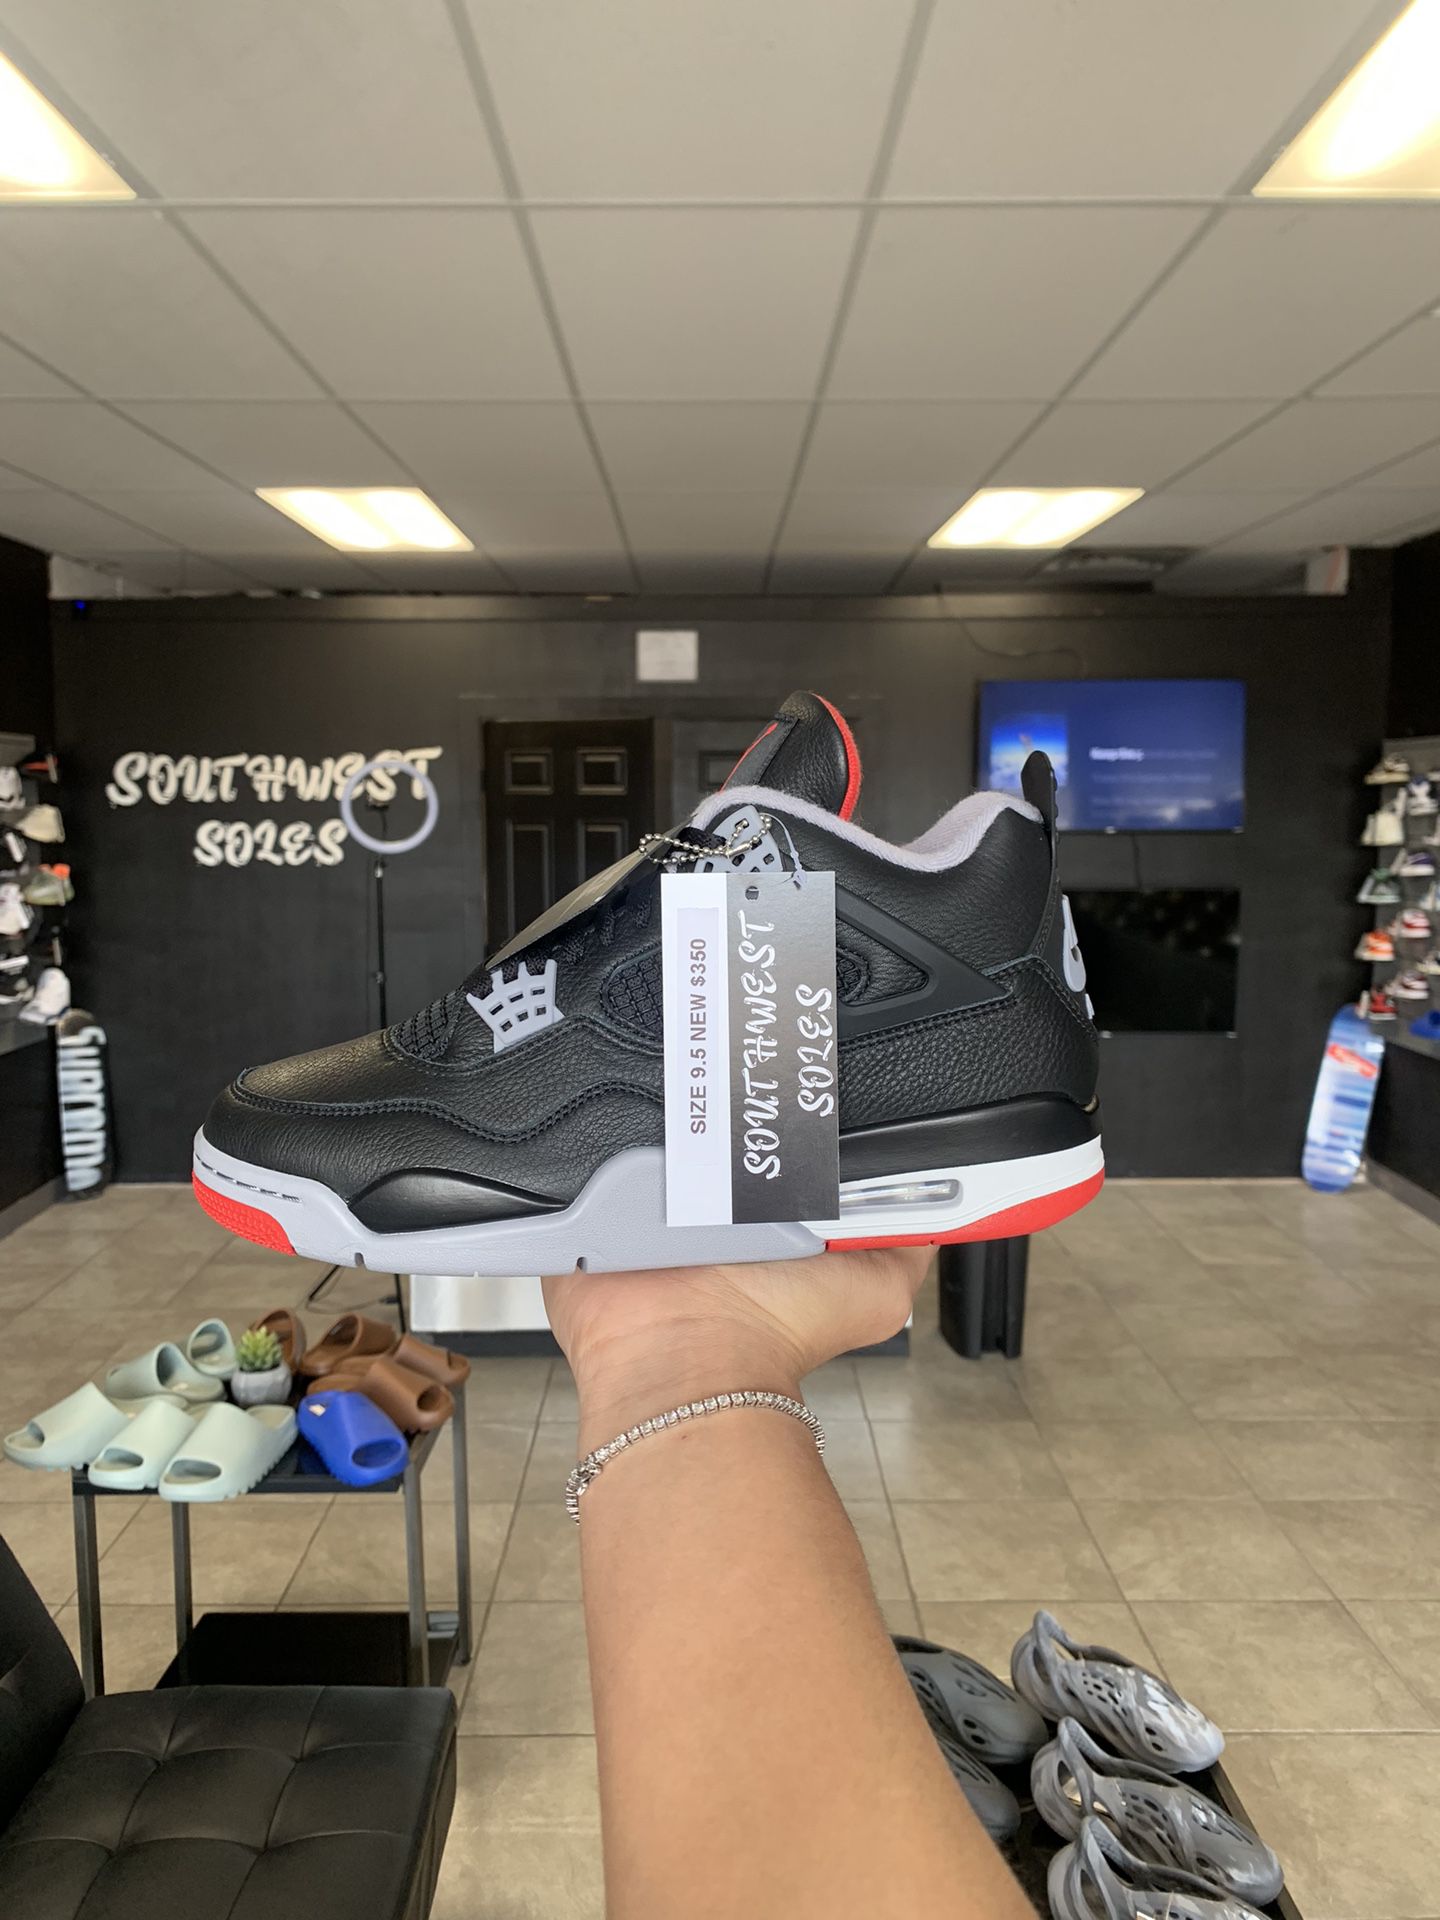 Jordan 4 Bred Size 9.5 Available In Store!